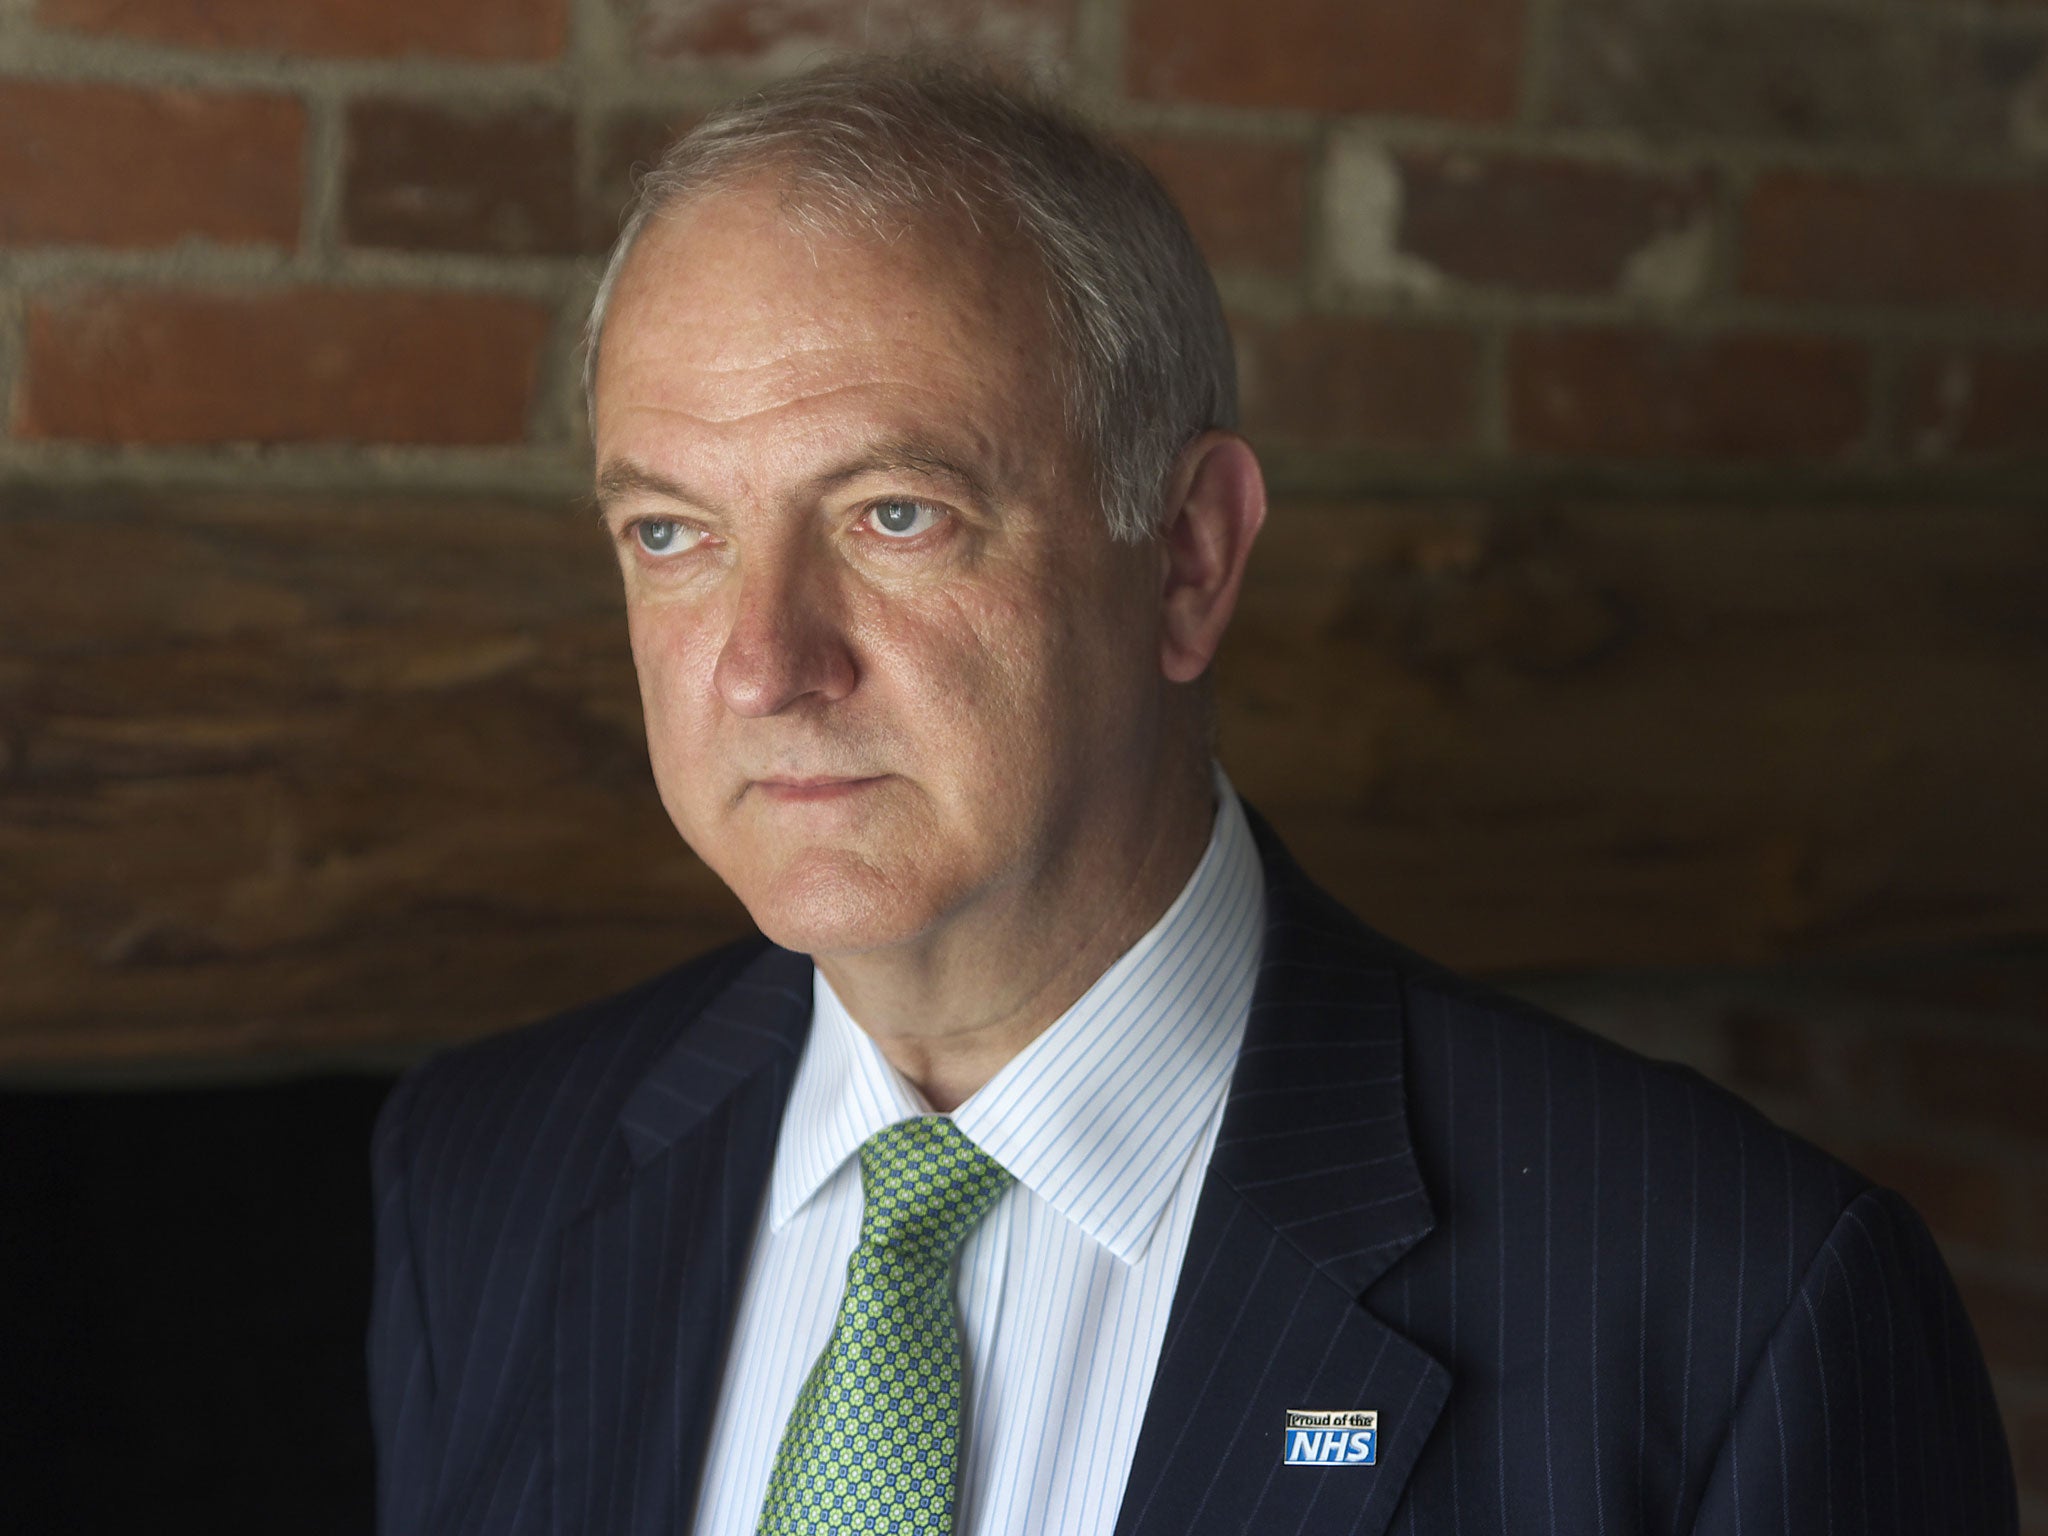 Sir Bruce Keogh called for an independent review of the unit